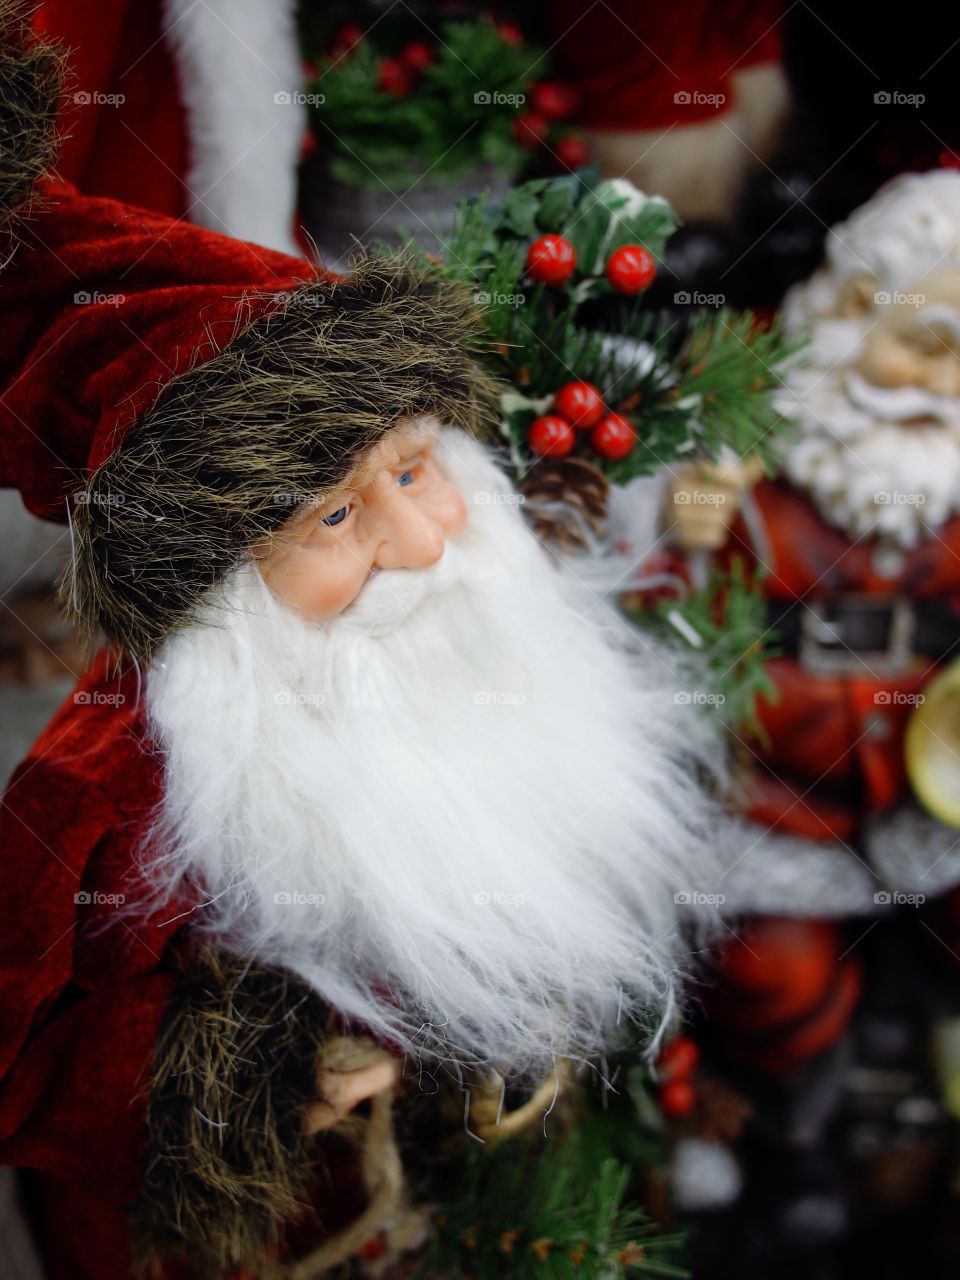 An old fashioned Santa Claus on display for the holiday season. 